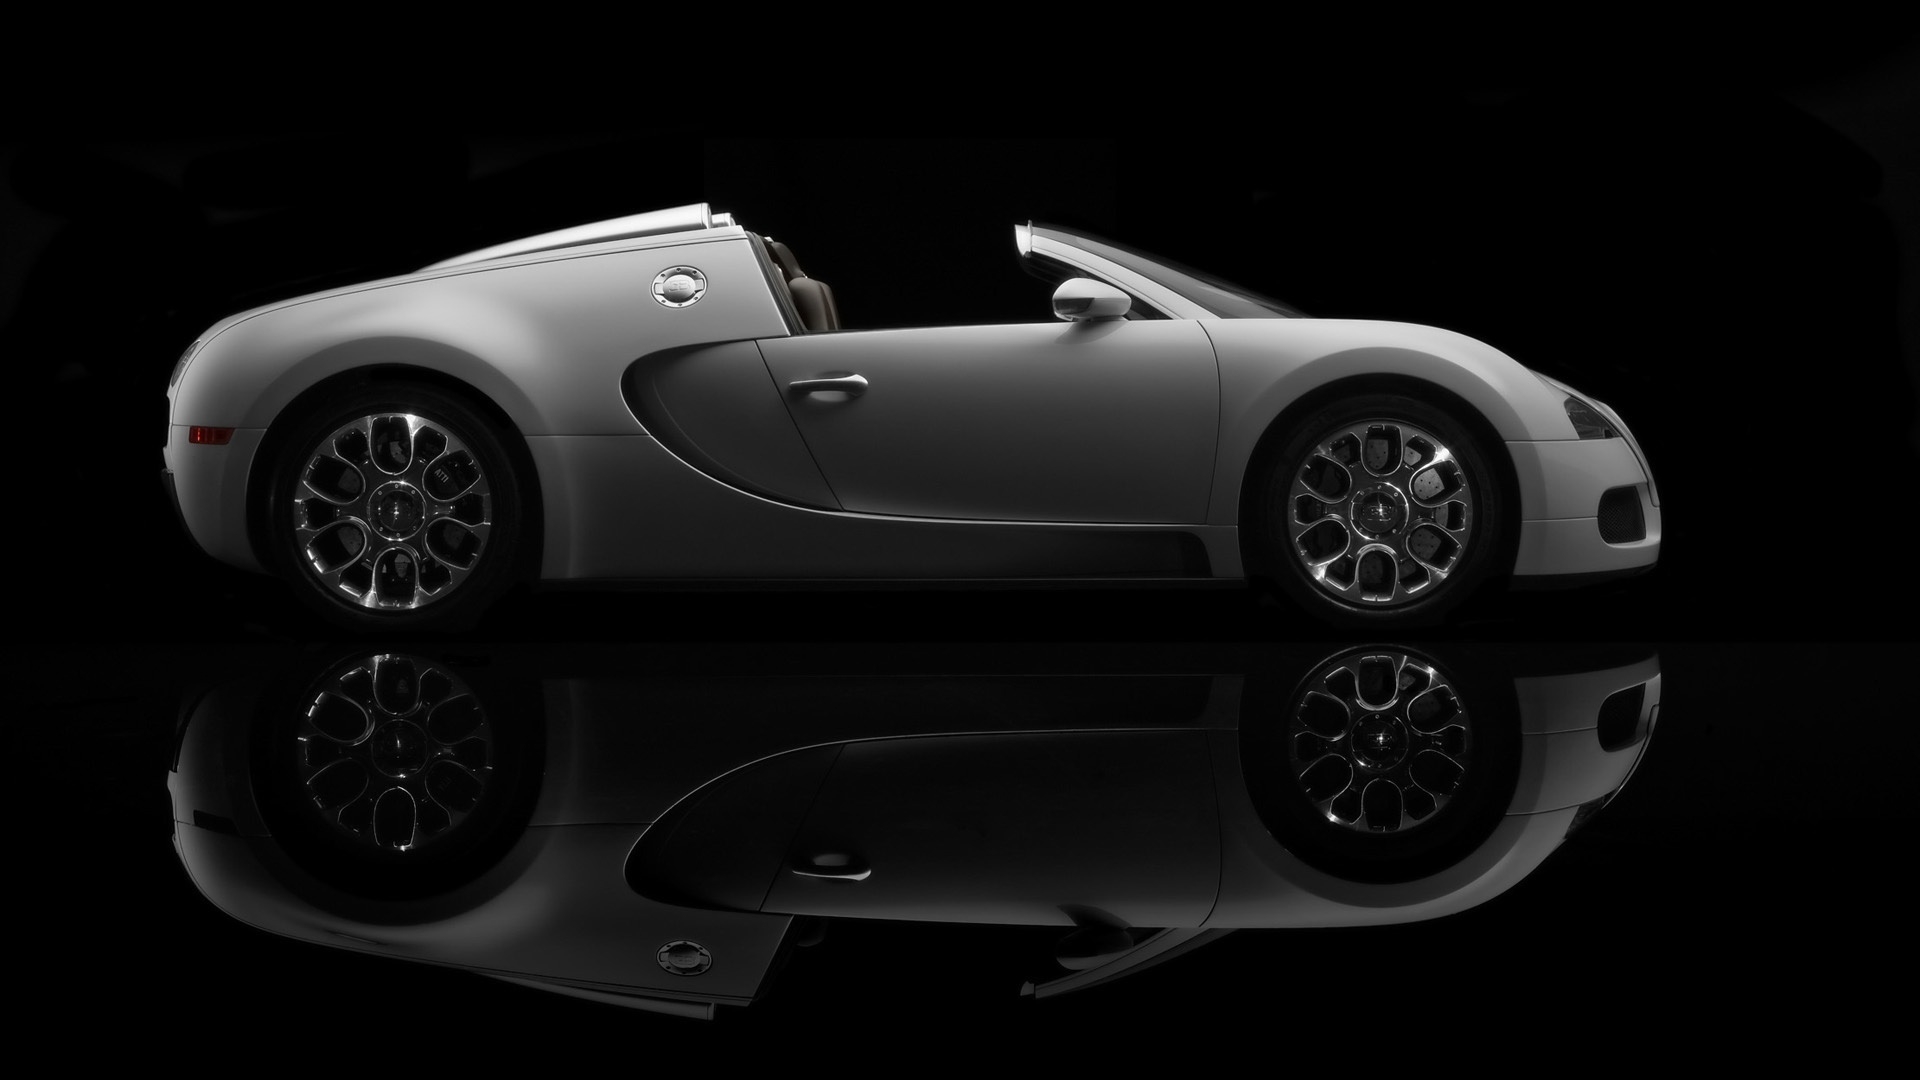 Bugatti Veyron 16.4 Grand Sport Production 2009 Version - Side Topless for 1920 x 1080 HDTV 1080p resolution